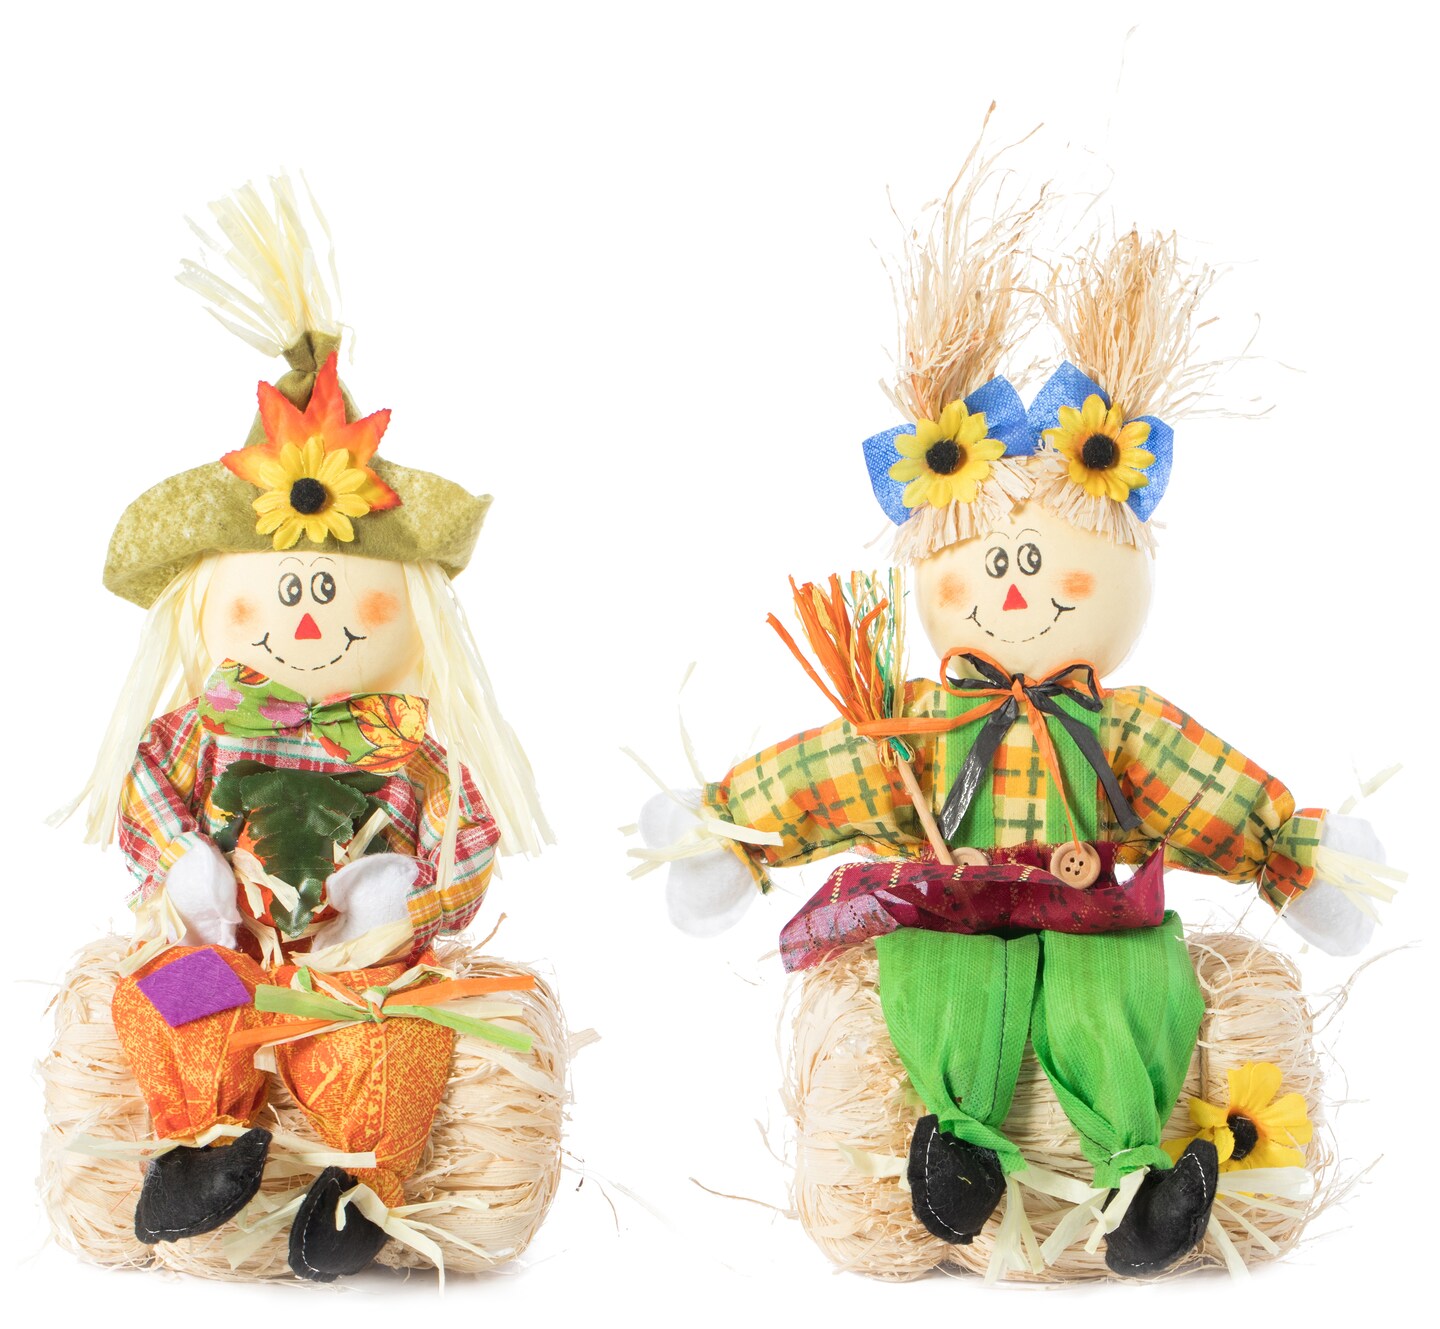 Gardenised 13 Inch Boy and Girl Duo Scarecrow Elegantly Seated on a Rustic Hay Bales - Enjoy the Magic they Bring and Let your Garden Blossom with their Captivating Presence